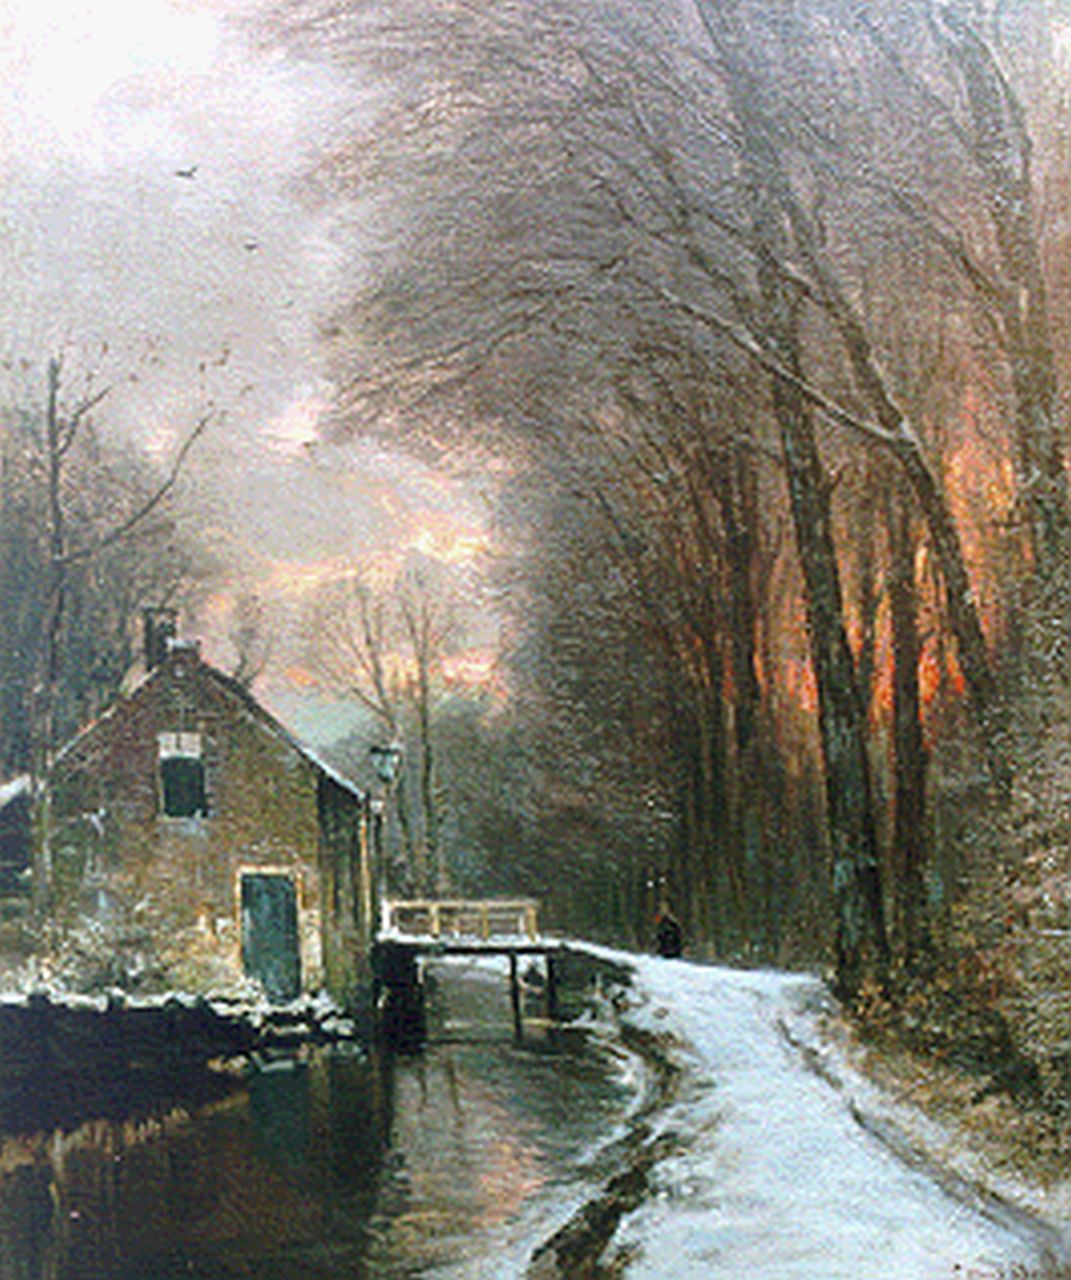 Apol L.F.H.  | Lodewijk Franciscus Hendrik 'Louis' Apol, A colourful sunset in winter, Öl auf Leinwand 61,0 x 51,0 cm, signed l.r.